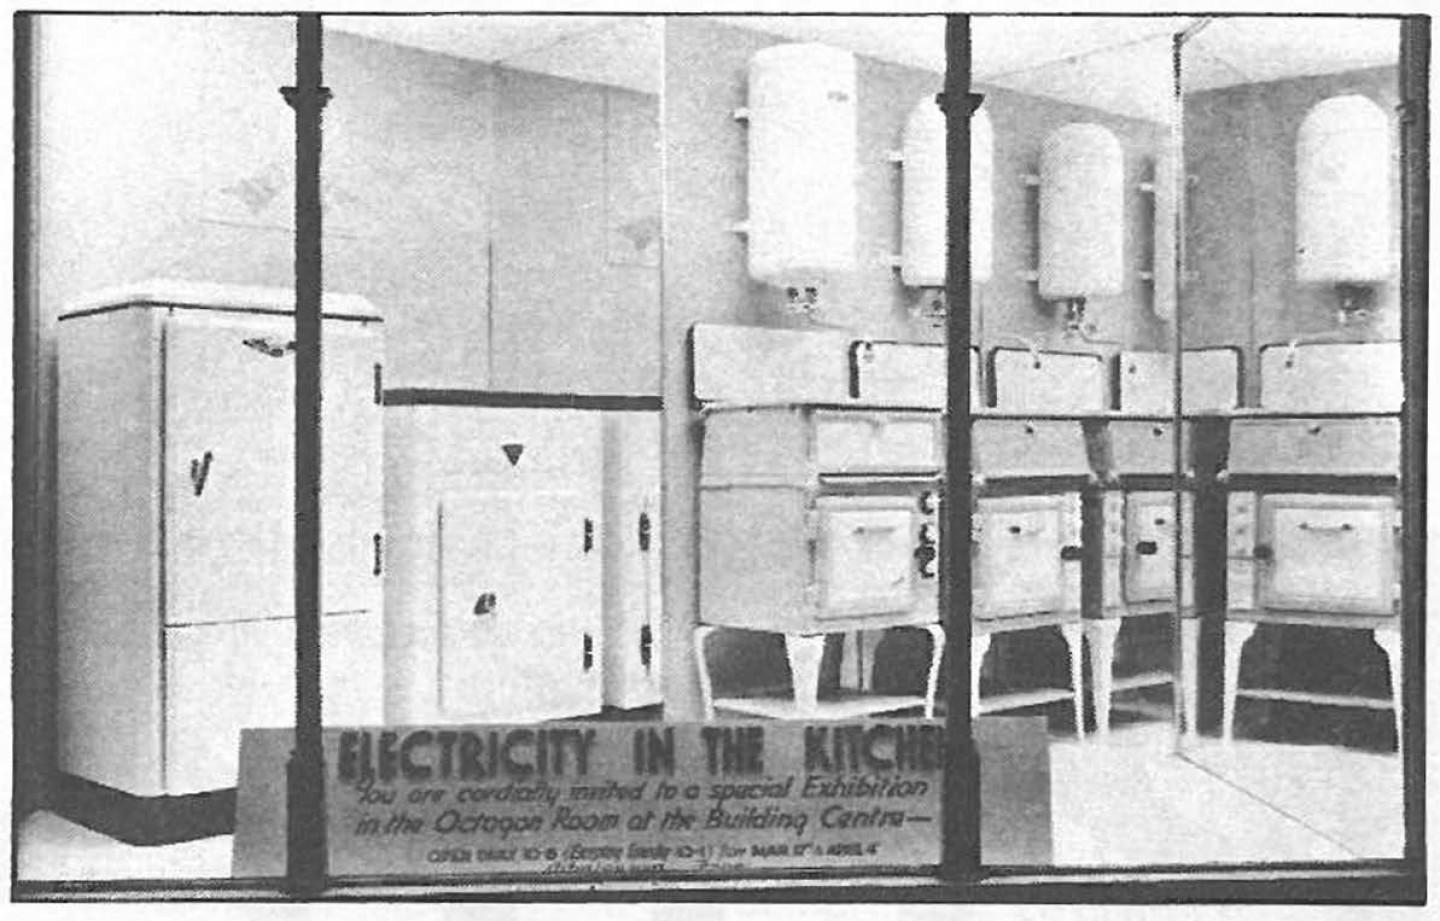 1945 – Electricity in the Kitchen exhibition © Building Centre